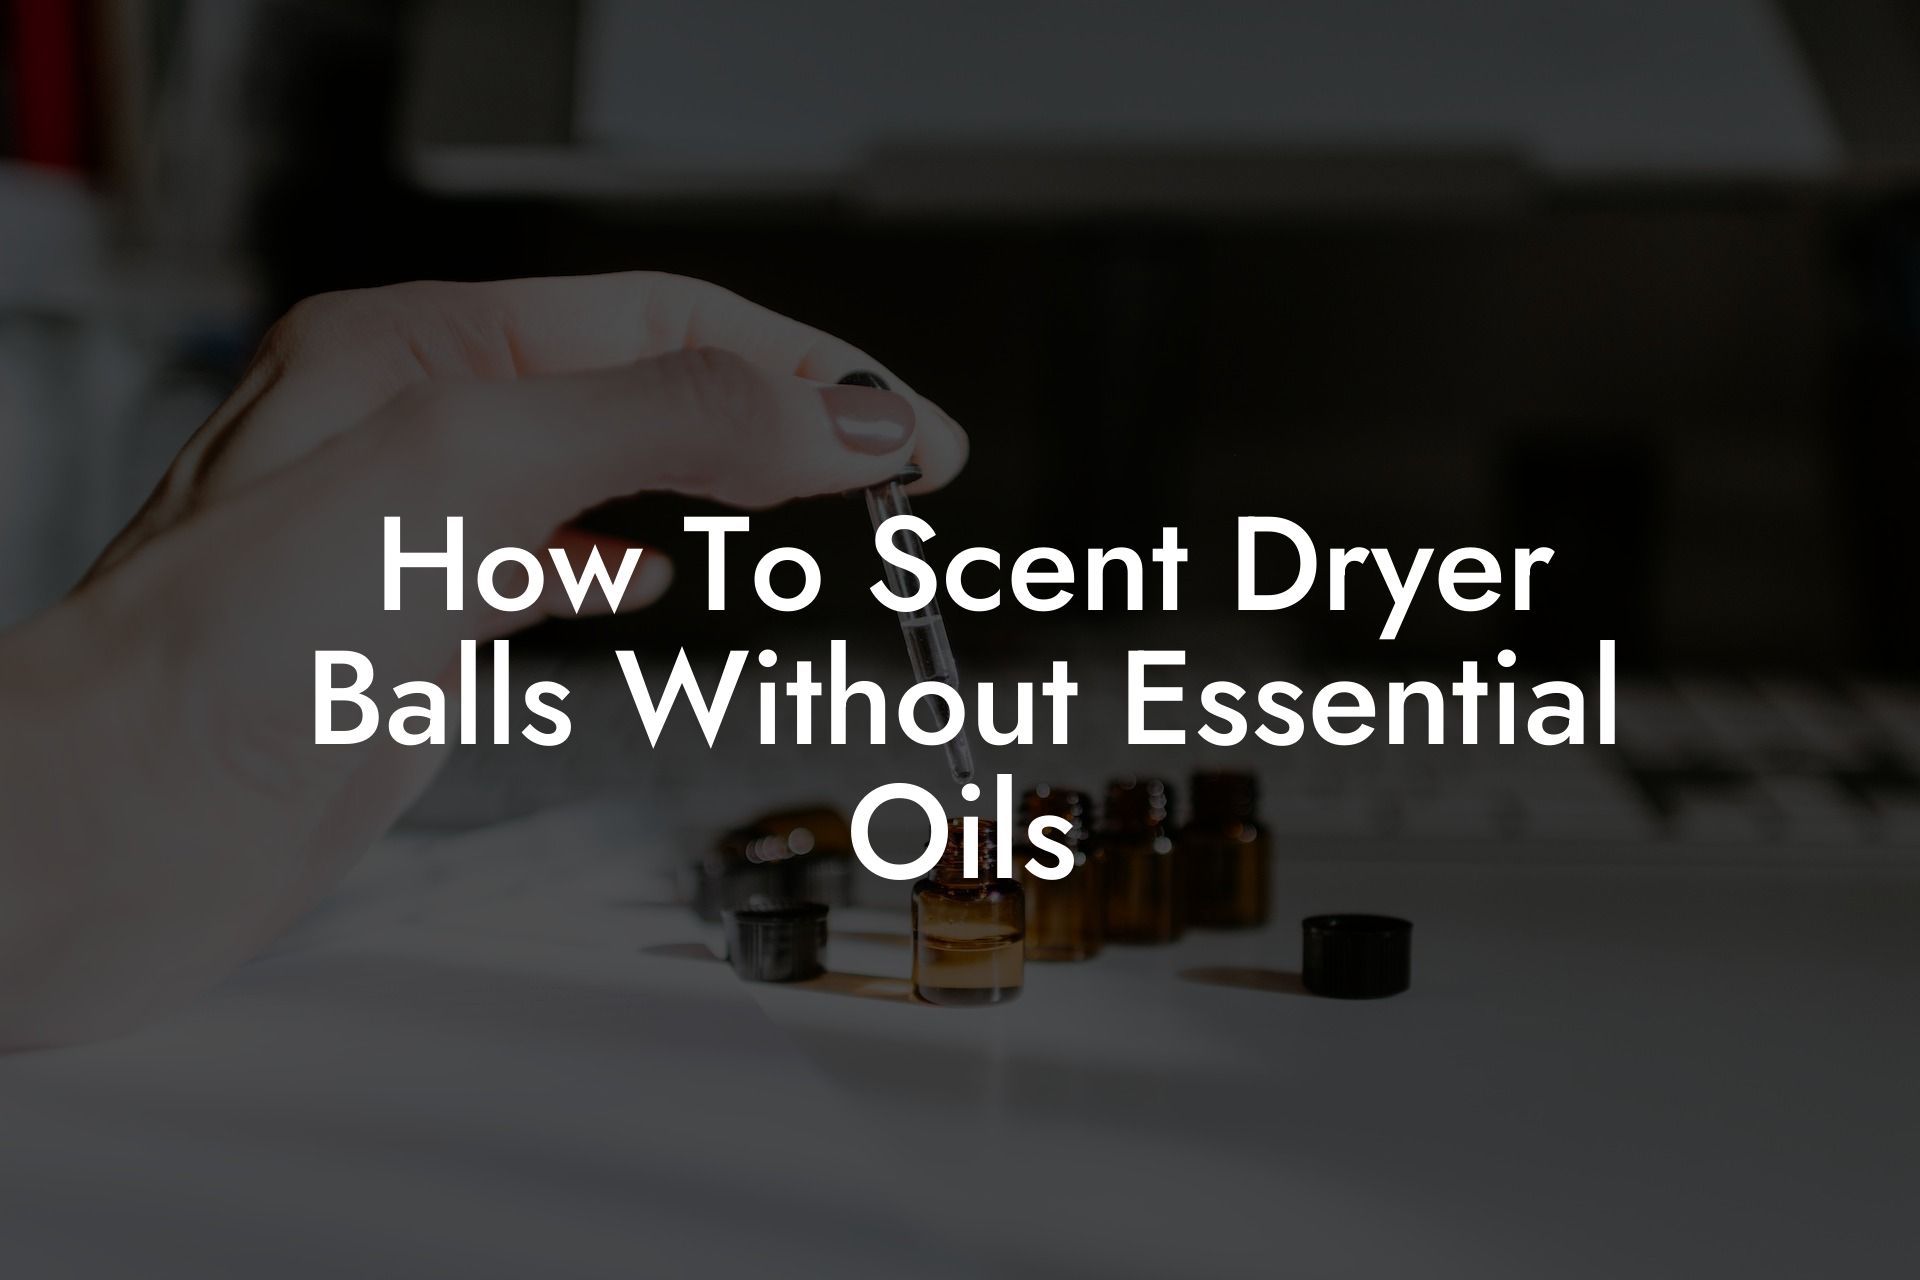 How To Scent Dryer Balls Without Essential Oils